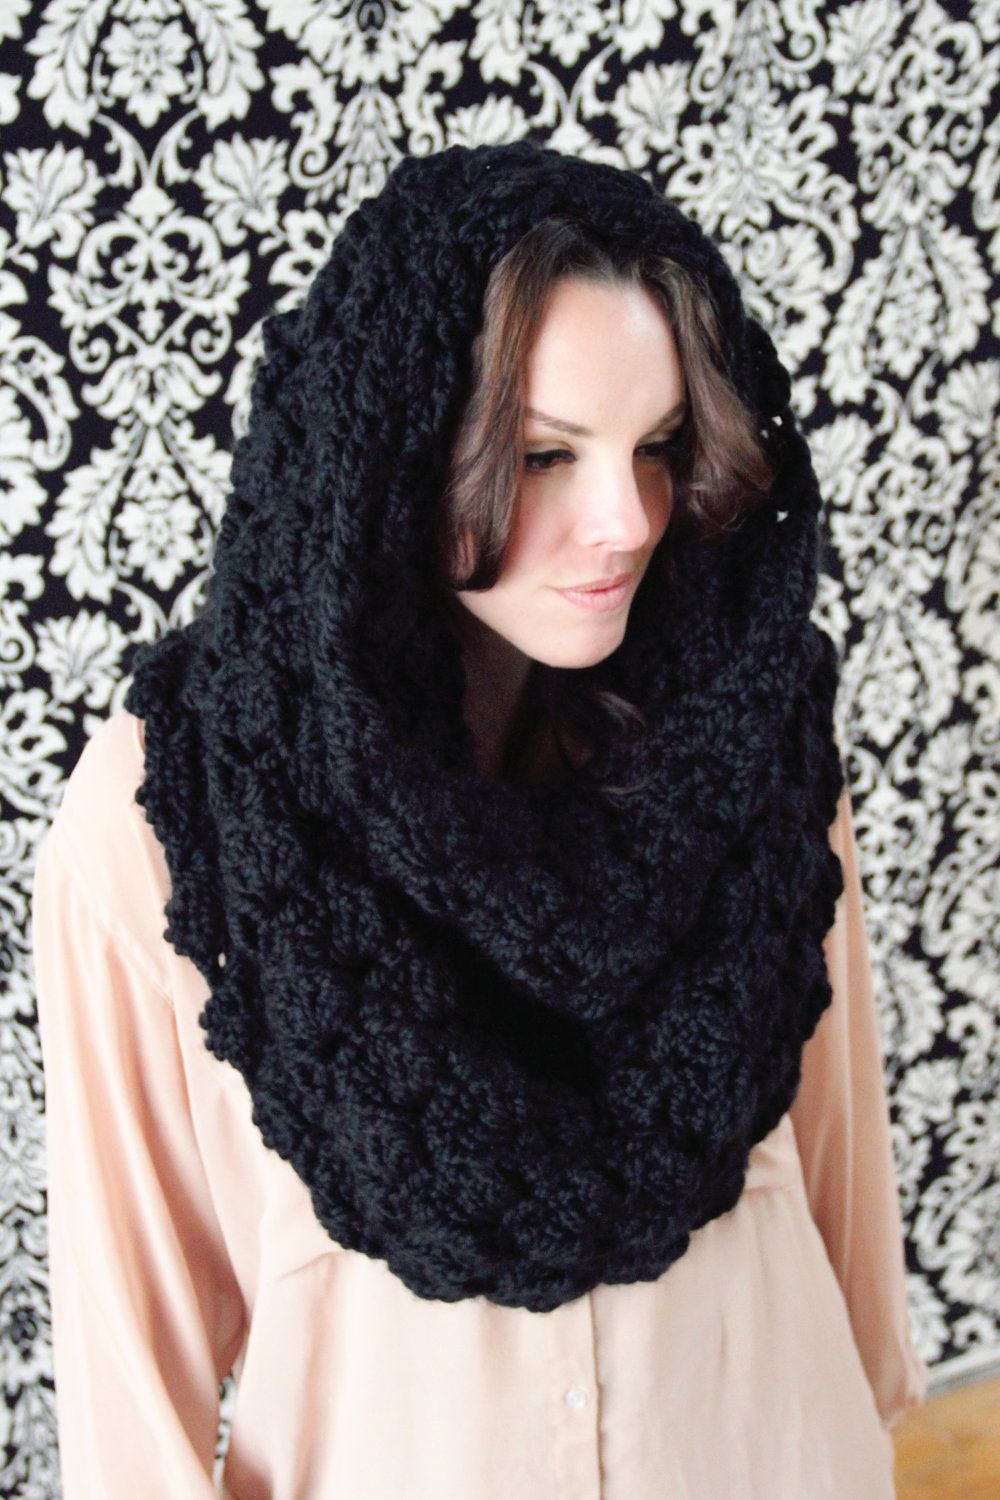 Hooded Cowl Crochet Pattern Cowl Chunky Crochet Pattern Hooded 3 In 1 Convertible Cowl Wrap The